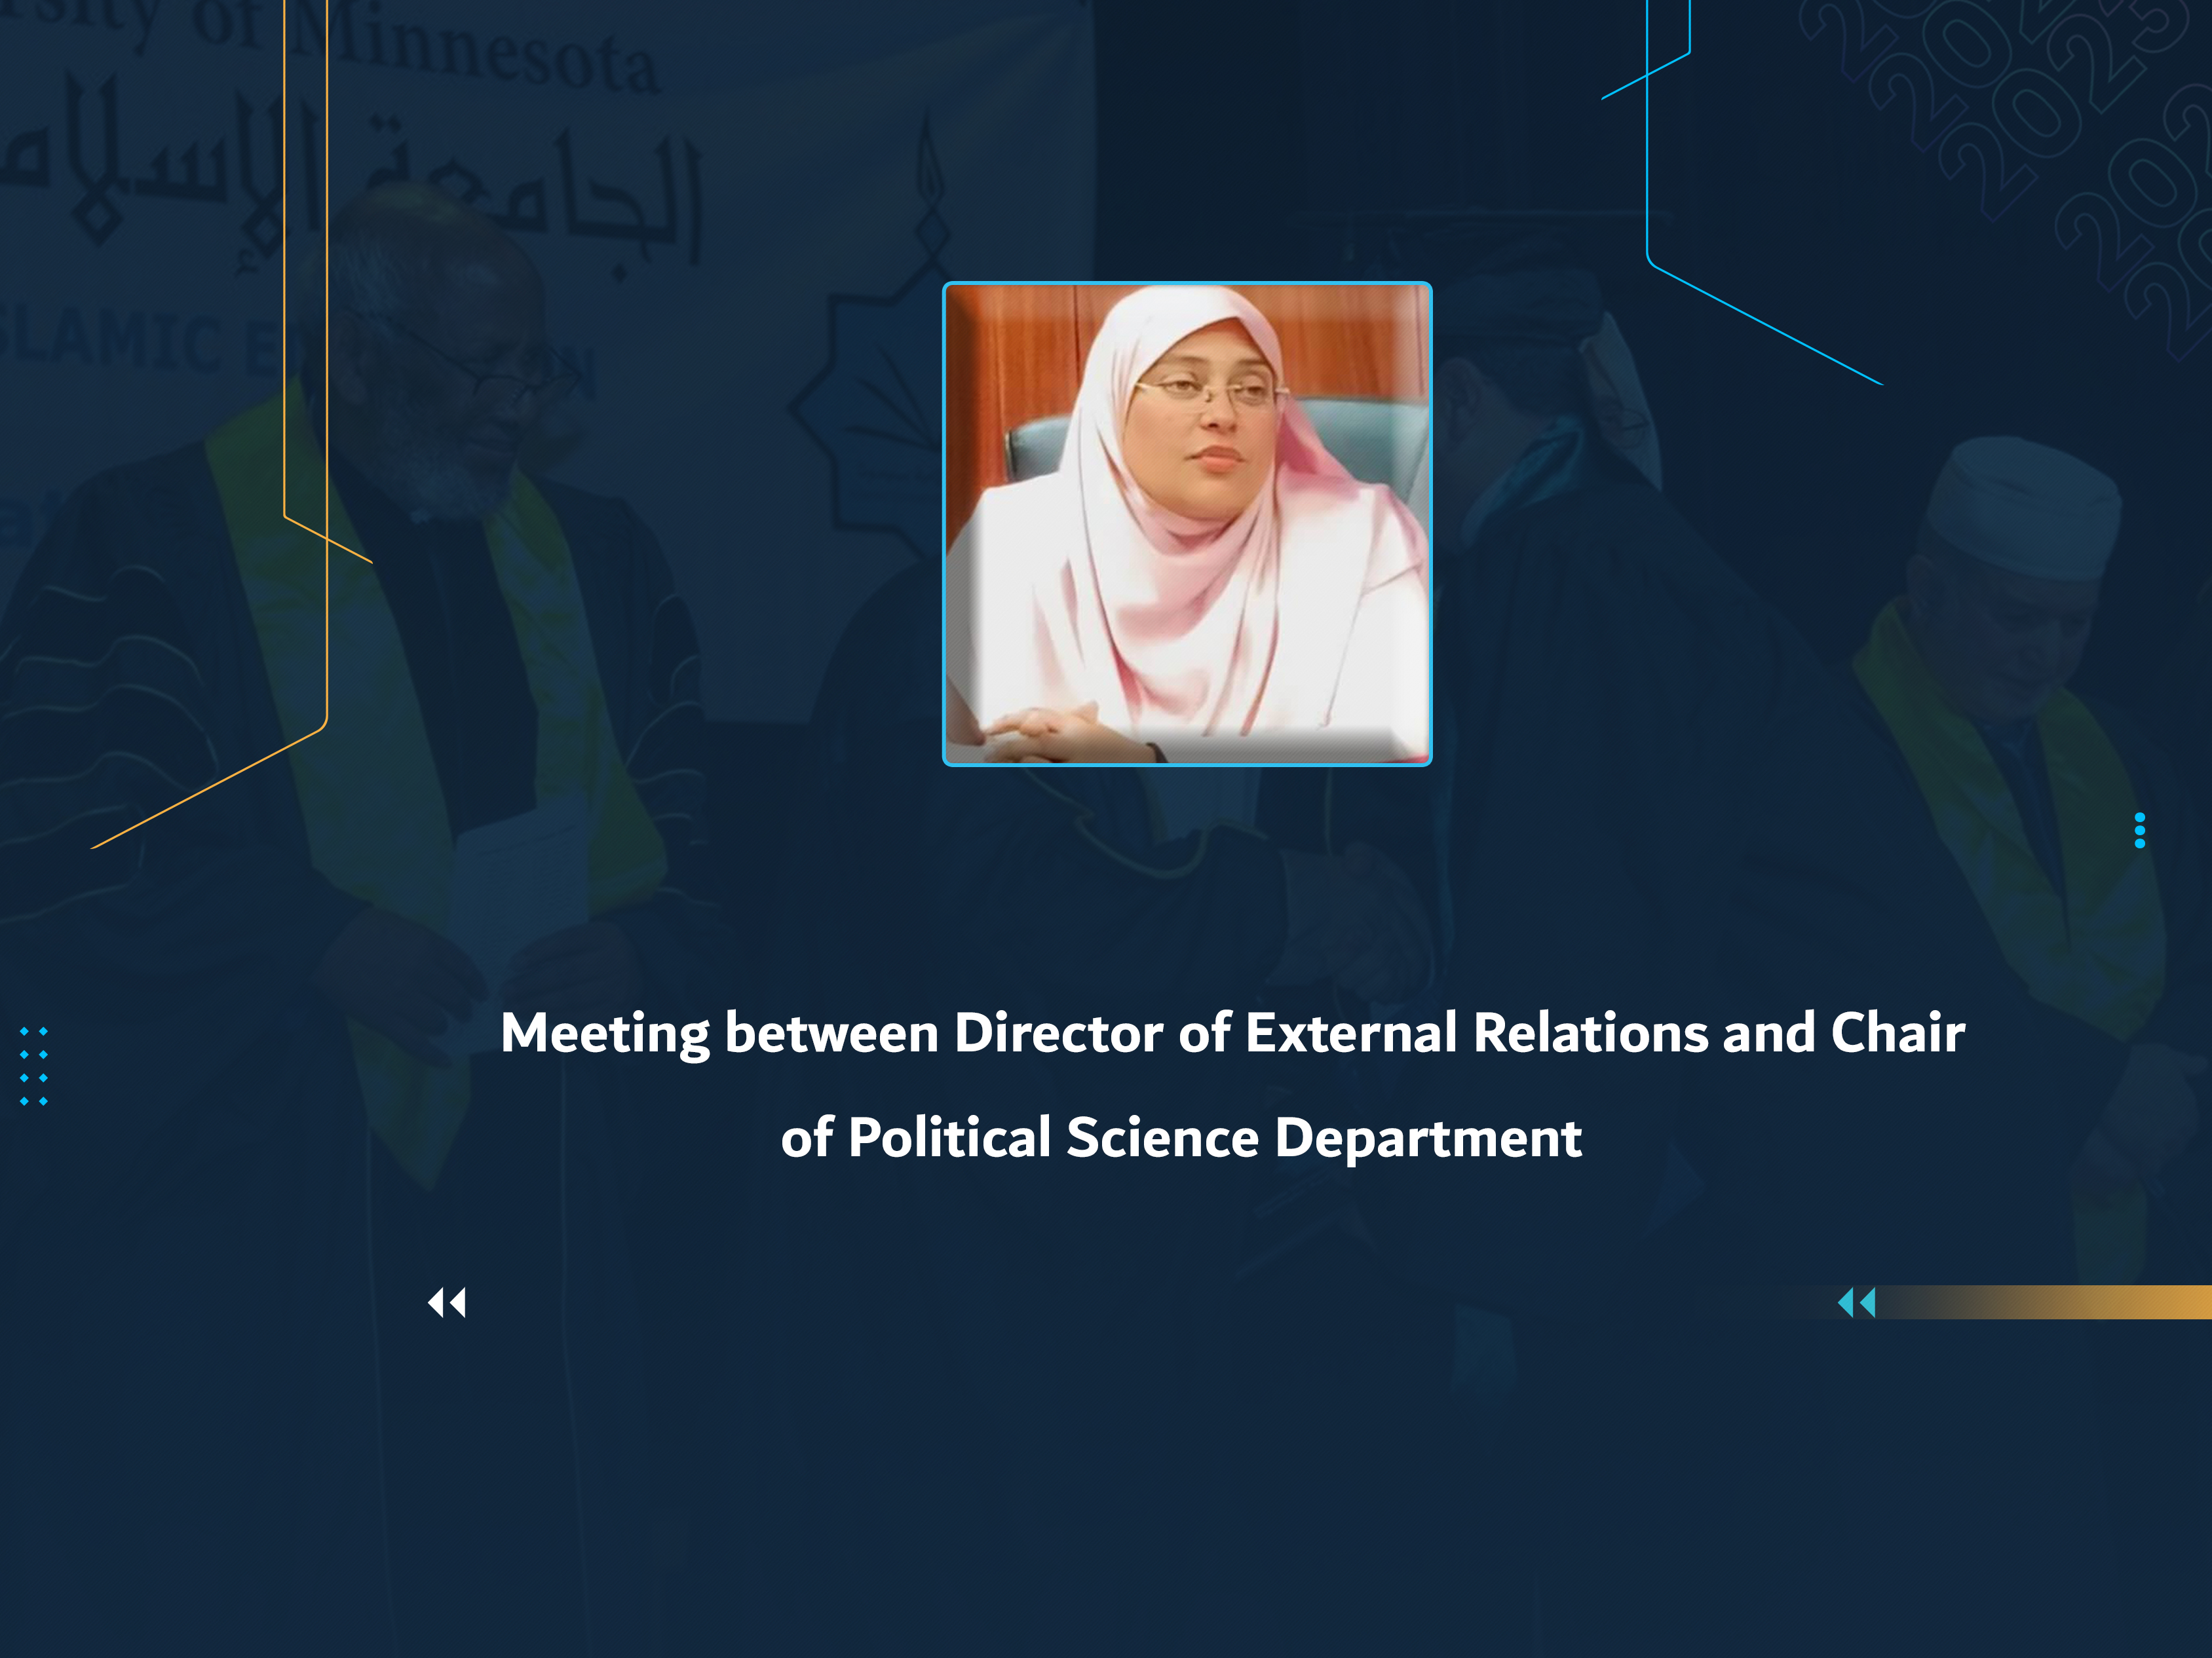 Meeting between Director of External Relations and Chair of Political Science Department